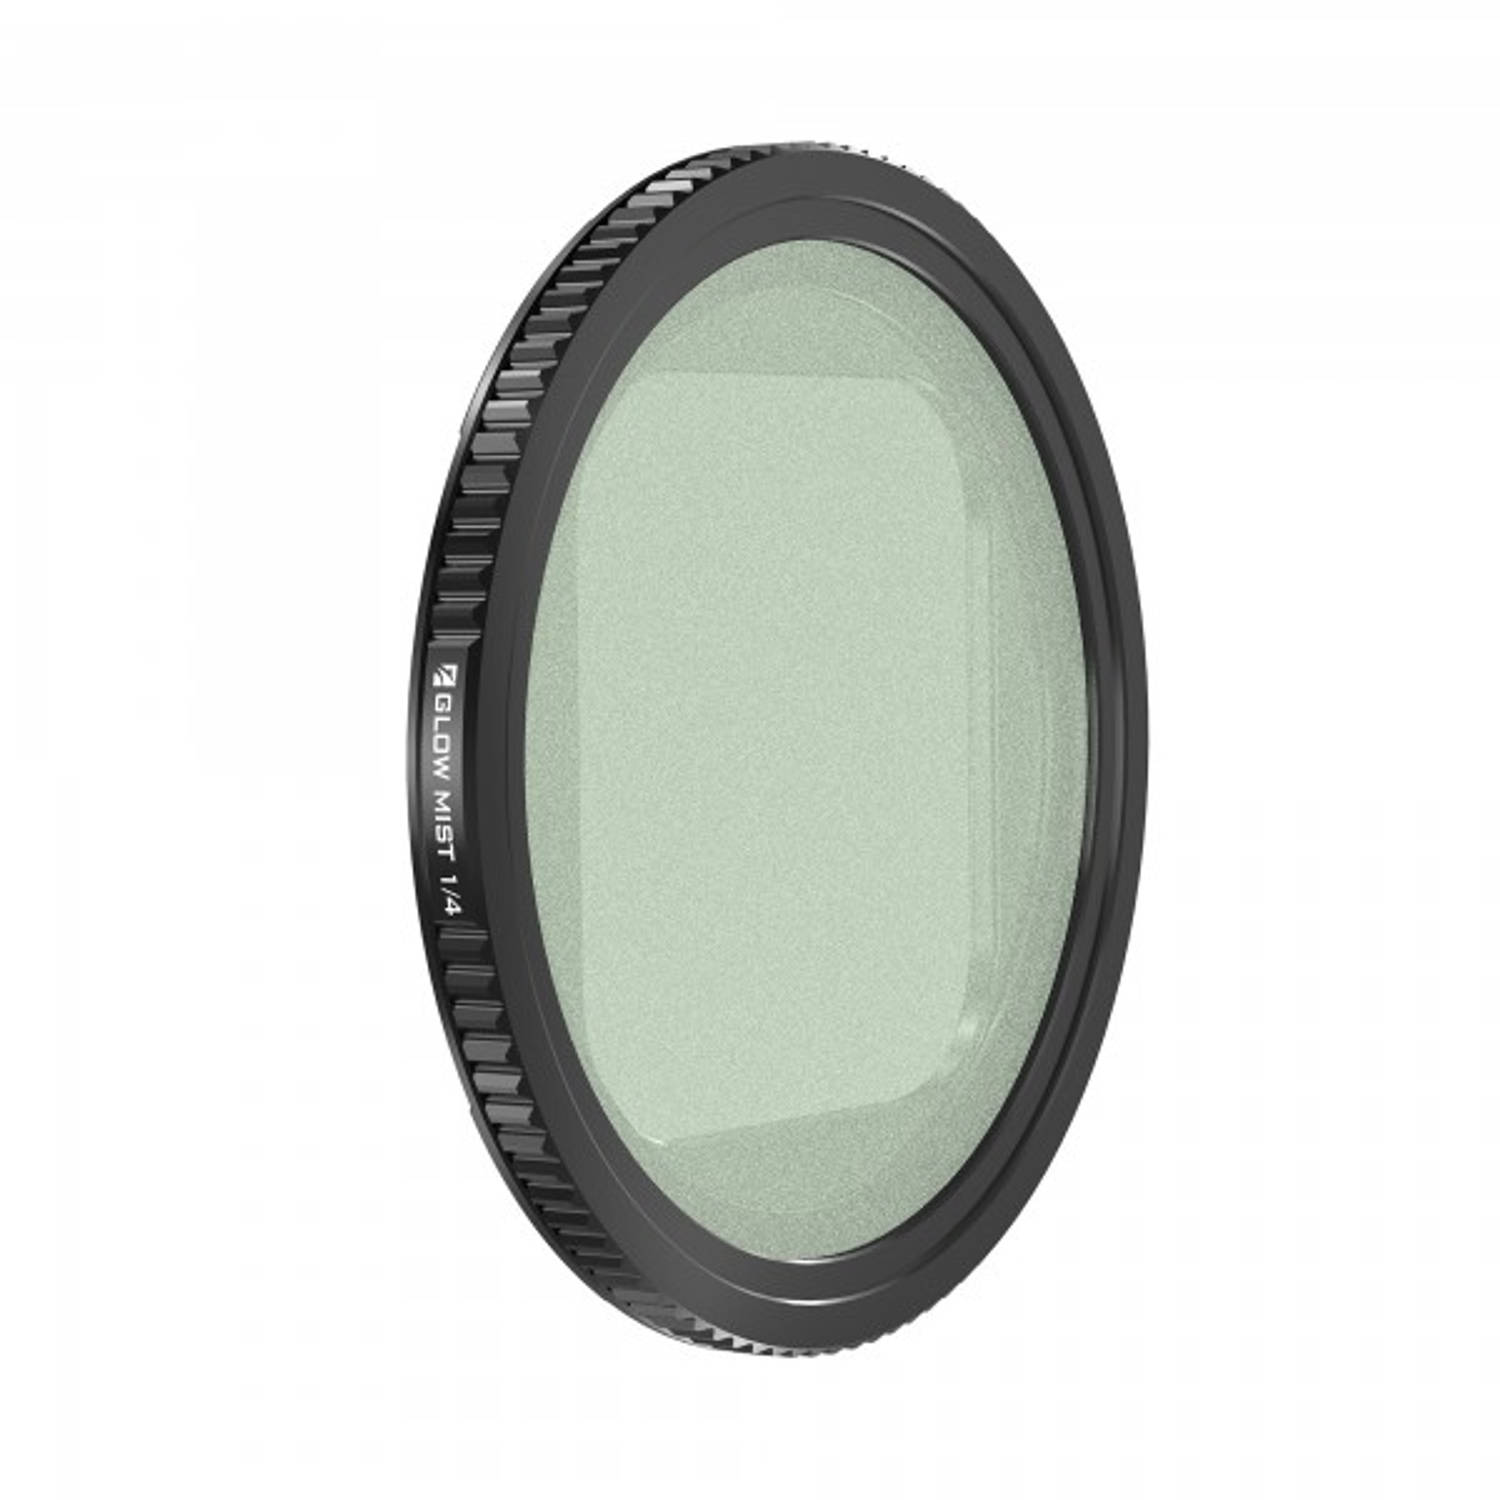 Freewell Diffusion Glow Mist 1-4 Filter Compatible only with